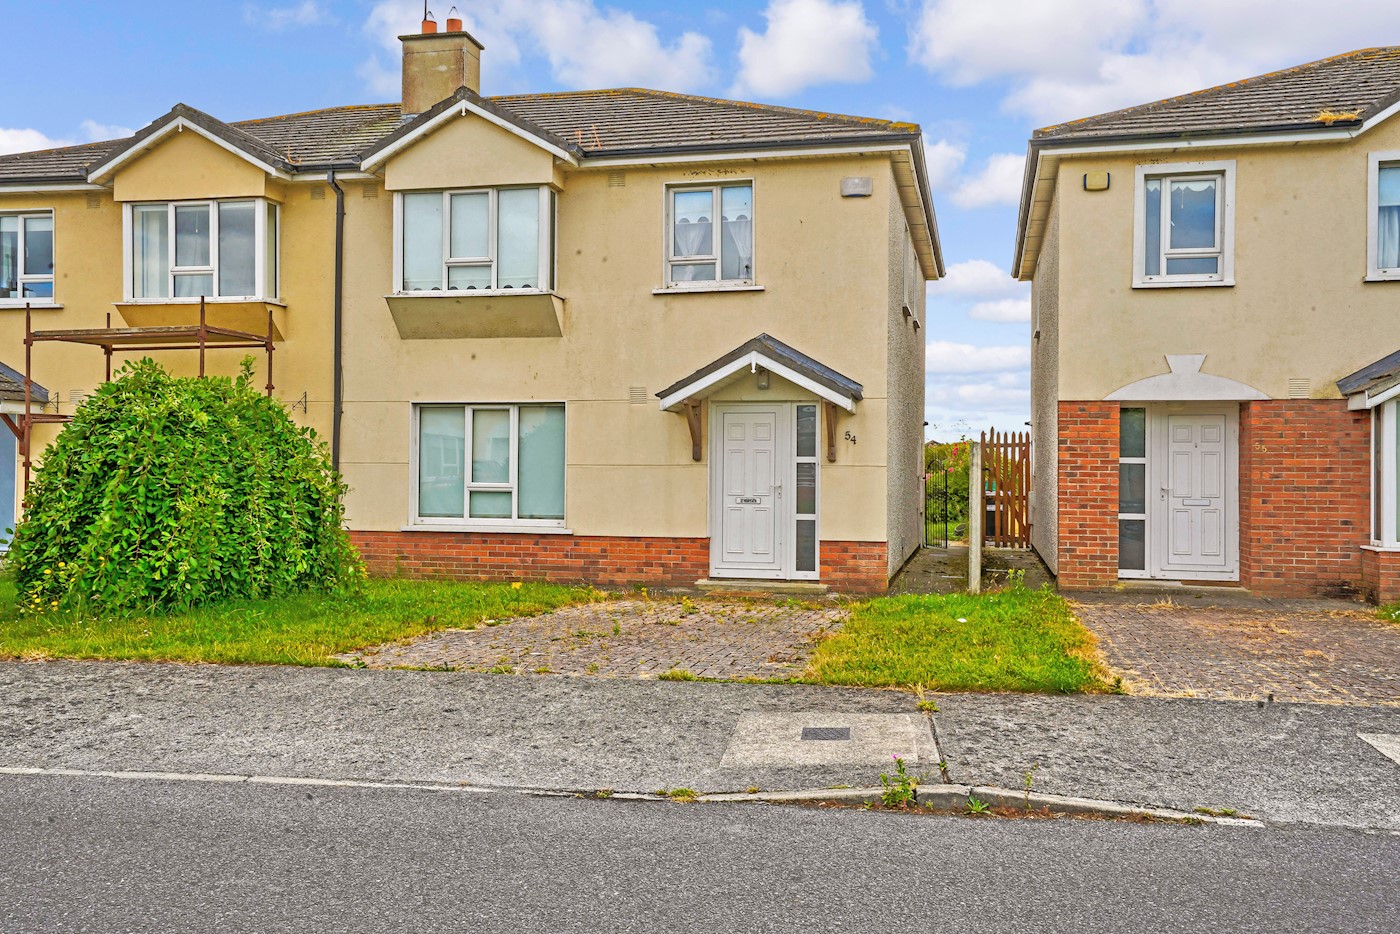 54 Quinagh Green, Carlow Town, Co. Carlow, R93 V0P2 1/20